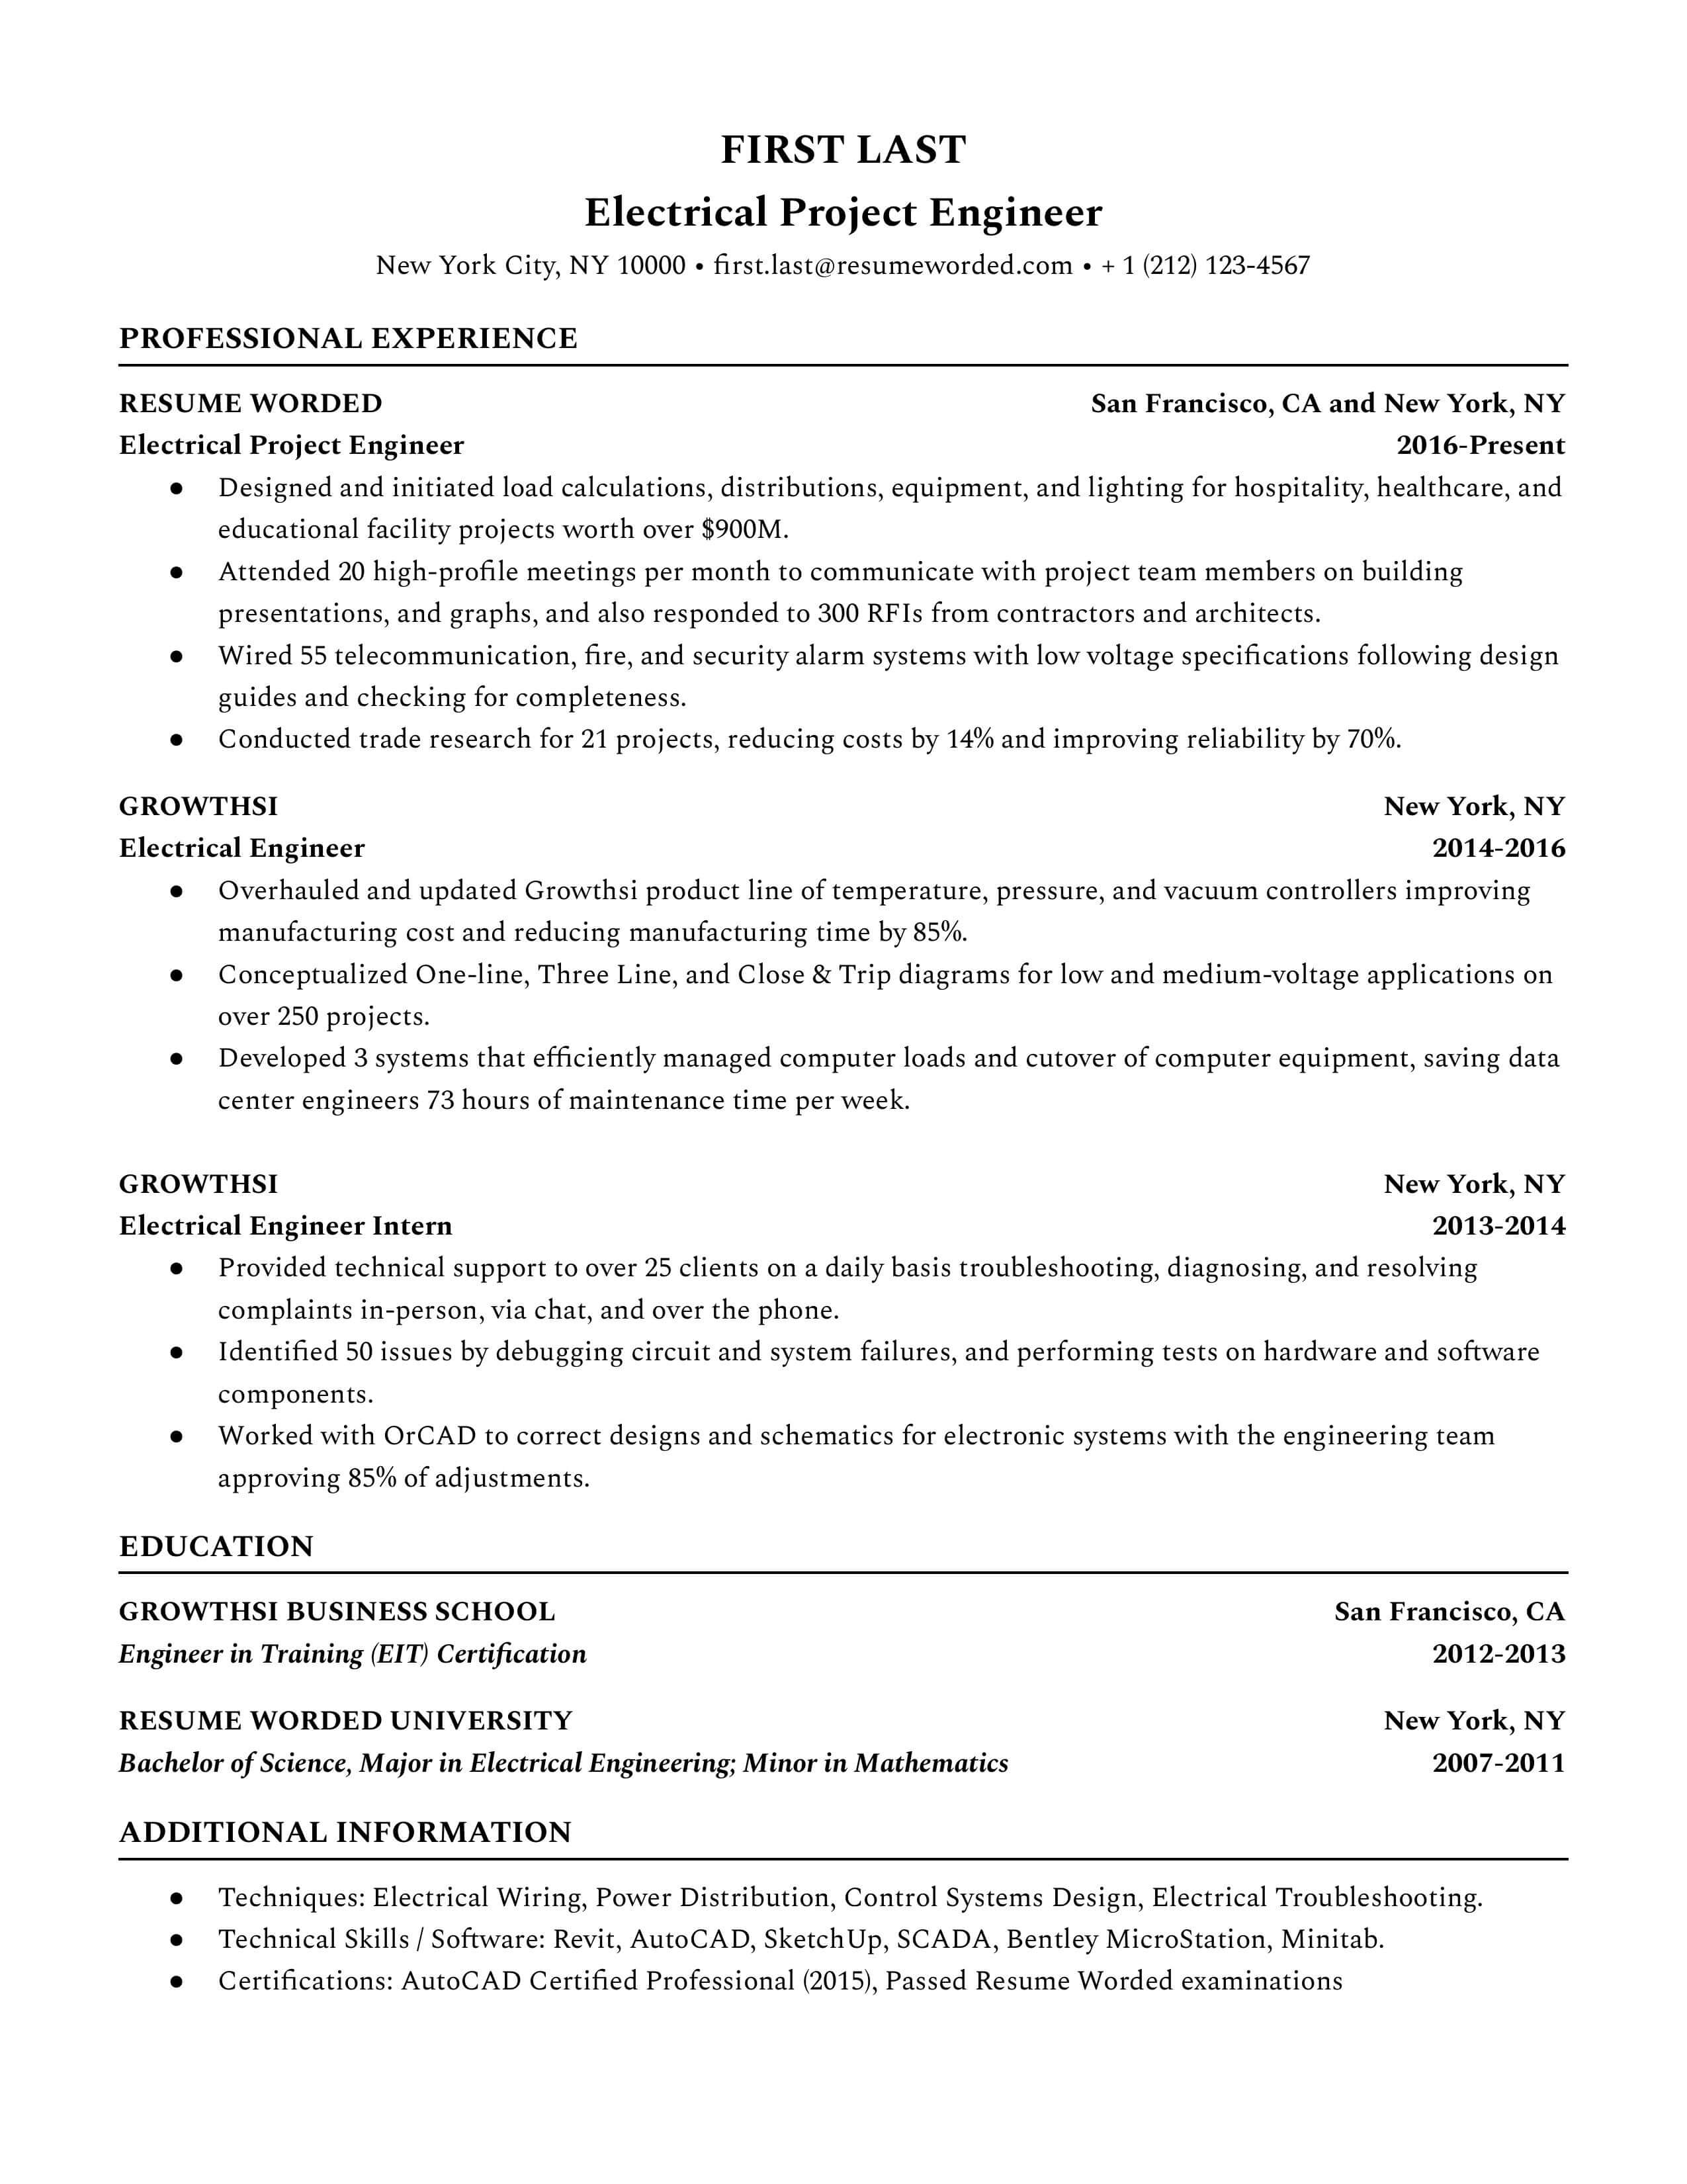 A detailed CV showcasing the mix of technical and management skills of an Electrical Project Engineer.